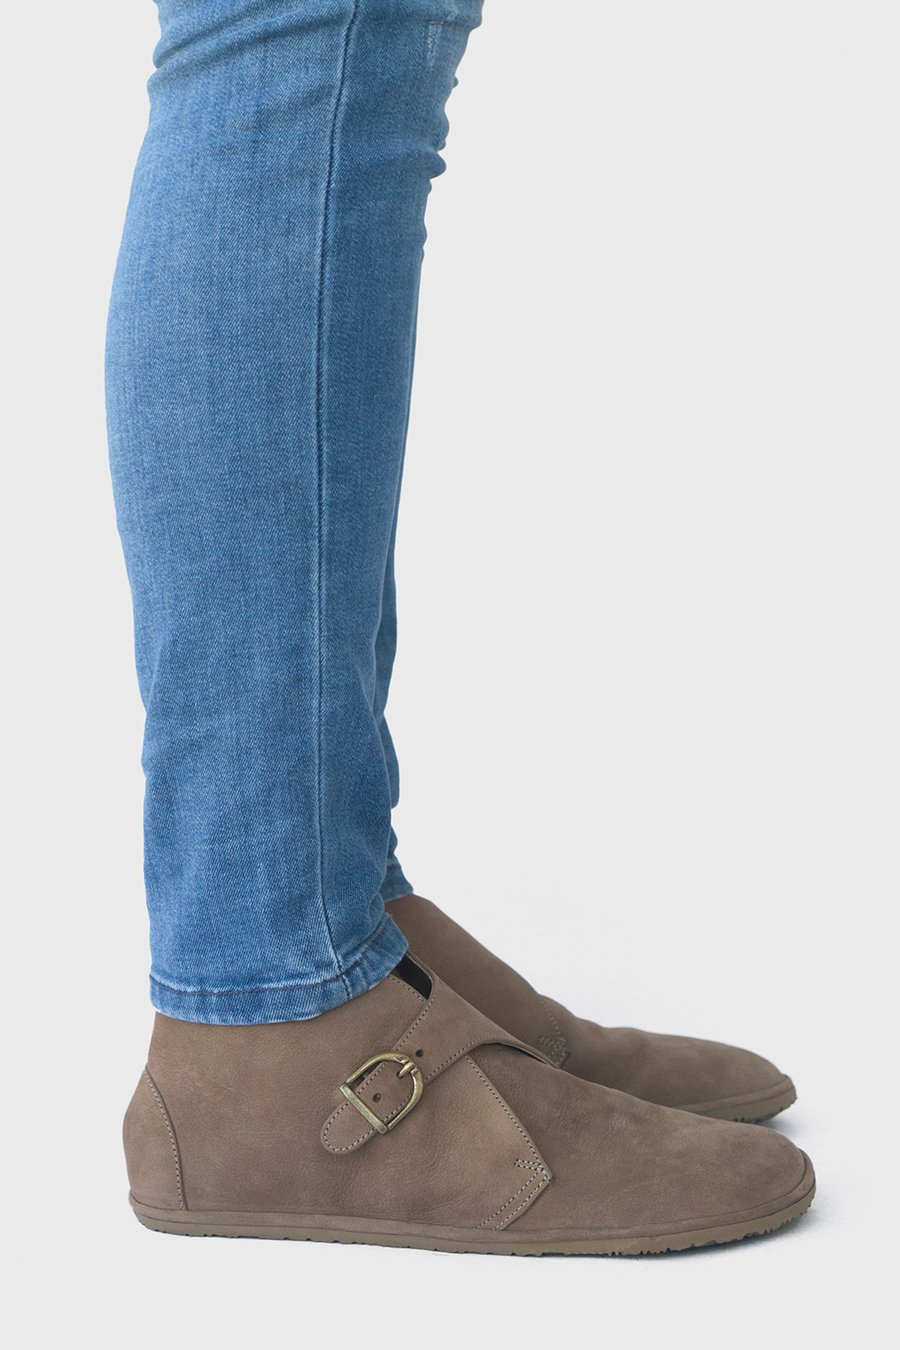 Image of Mono - Monk boots in Taupe Nubuck